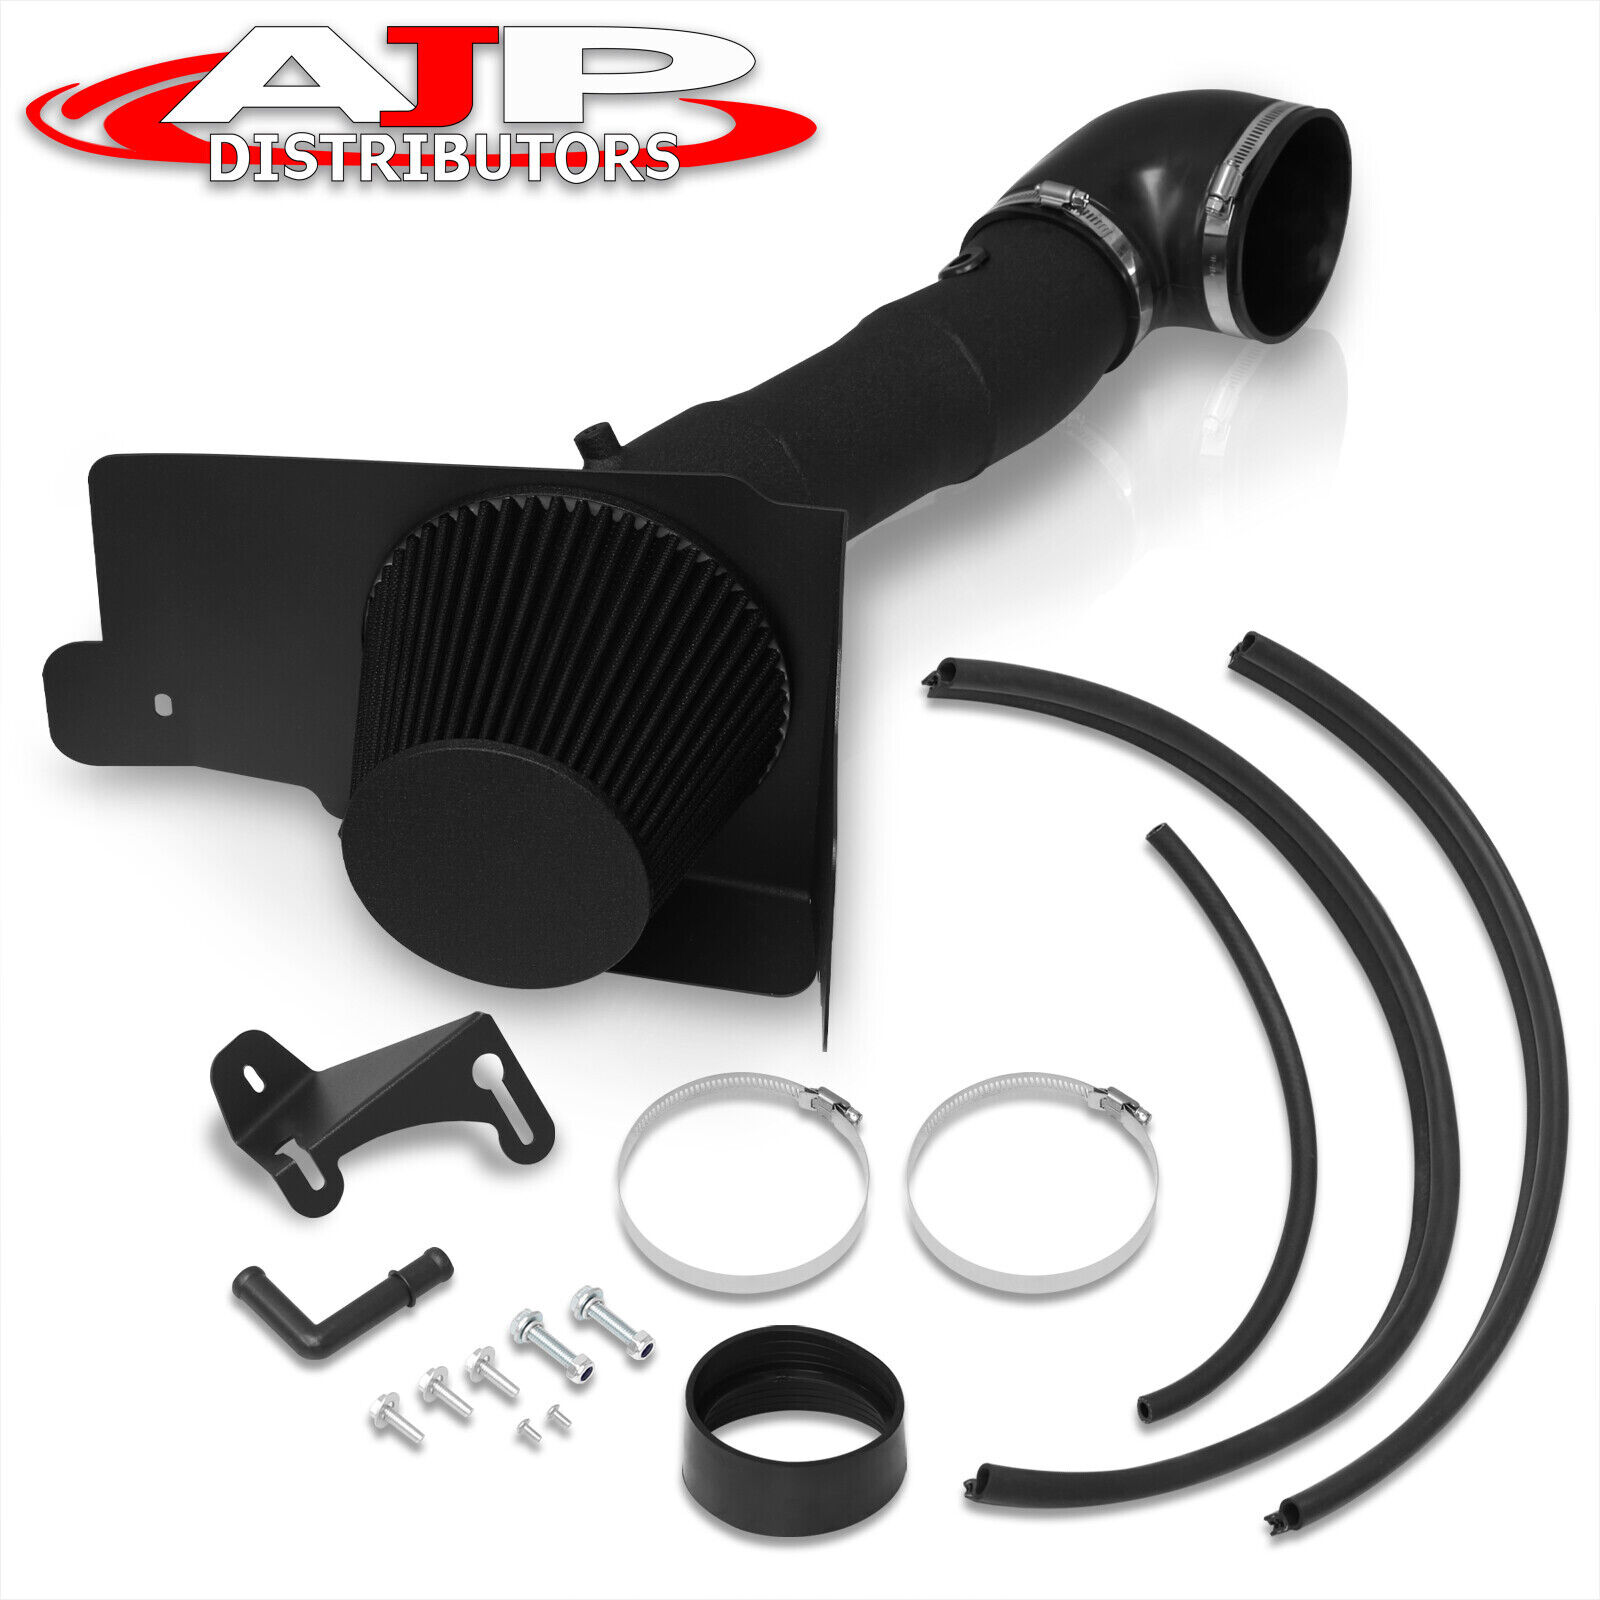 Black Cold Air Intake Induction + Heat Shield For 2005-2009 Ford Mustang V8 4.6